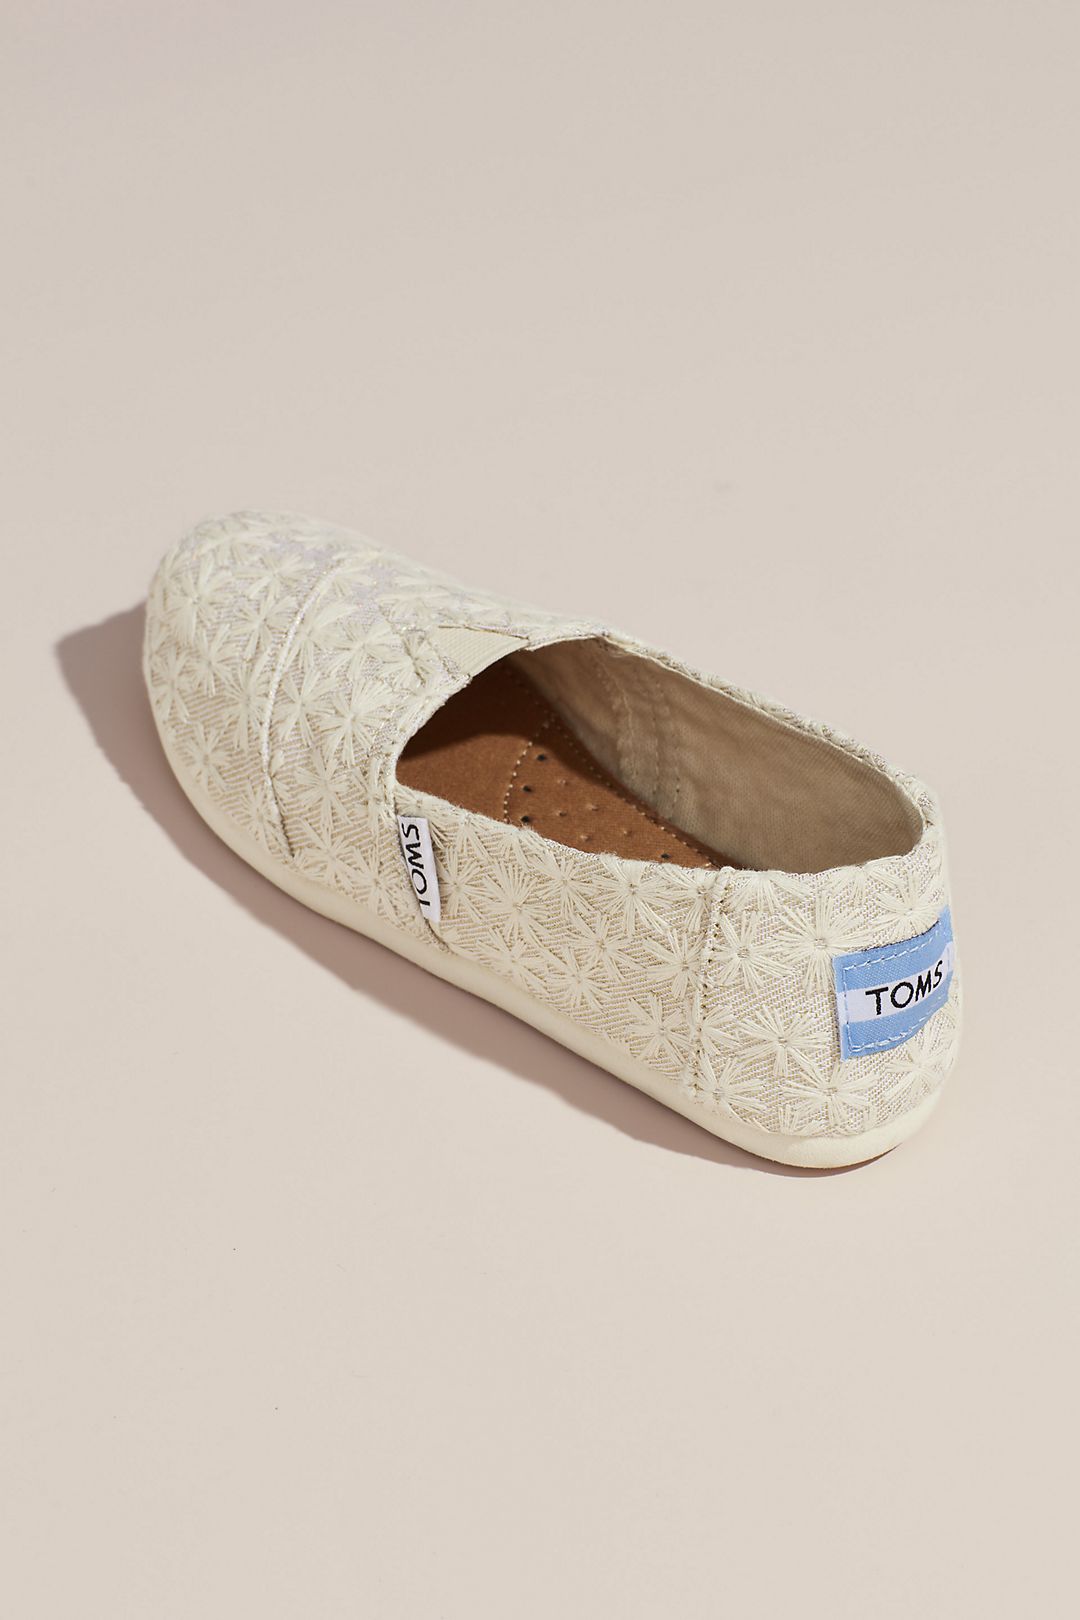 TOMS Embroidered Floral Slip-On Shoes Image 4